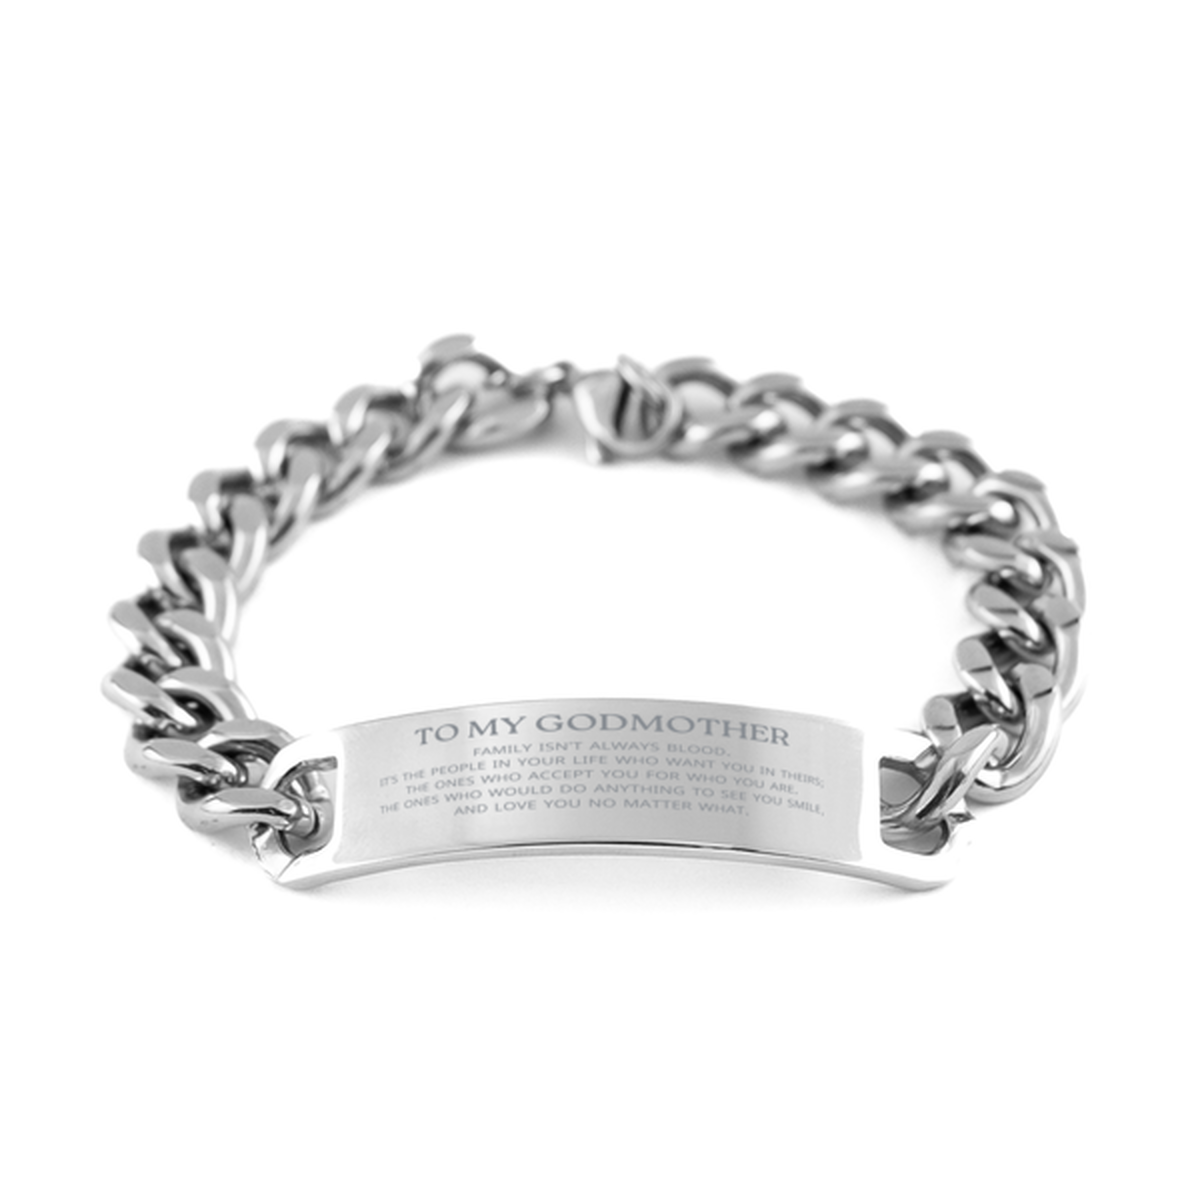 To My Godmother Gifts, Family isn't always blood, Godmother Cuban Chain Stainless Steel Bracelet, Birthday Christmas Unique Present For Godmother